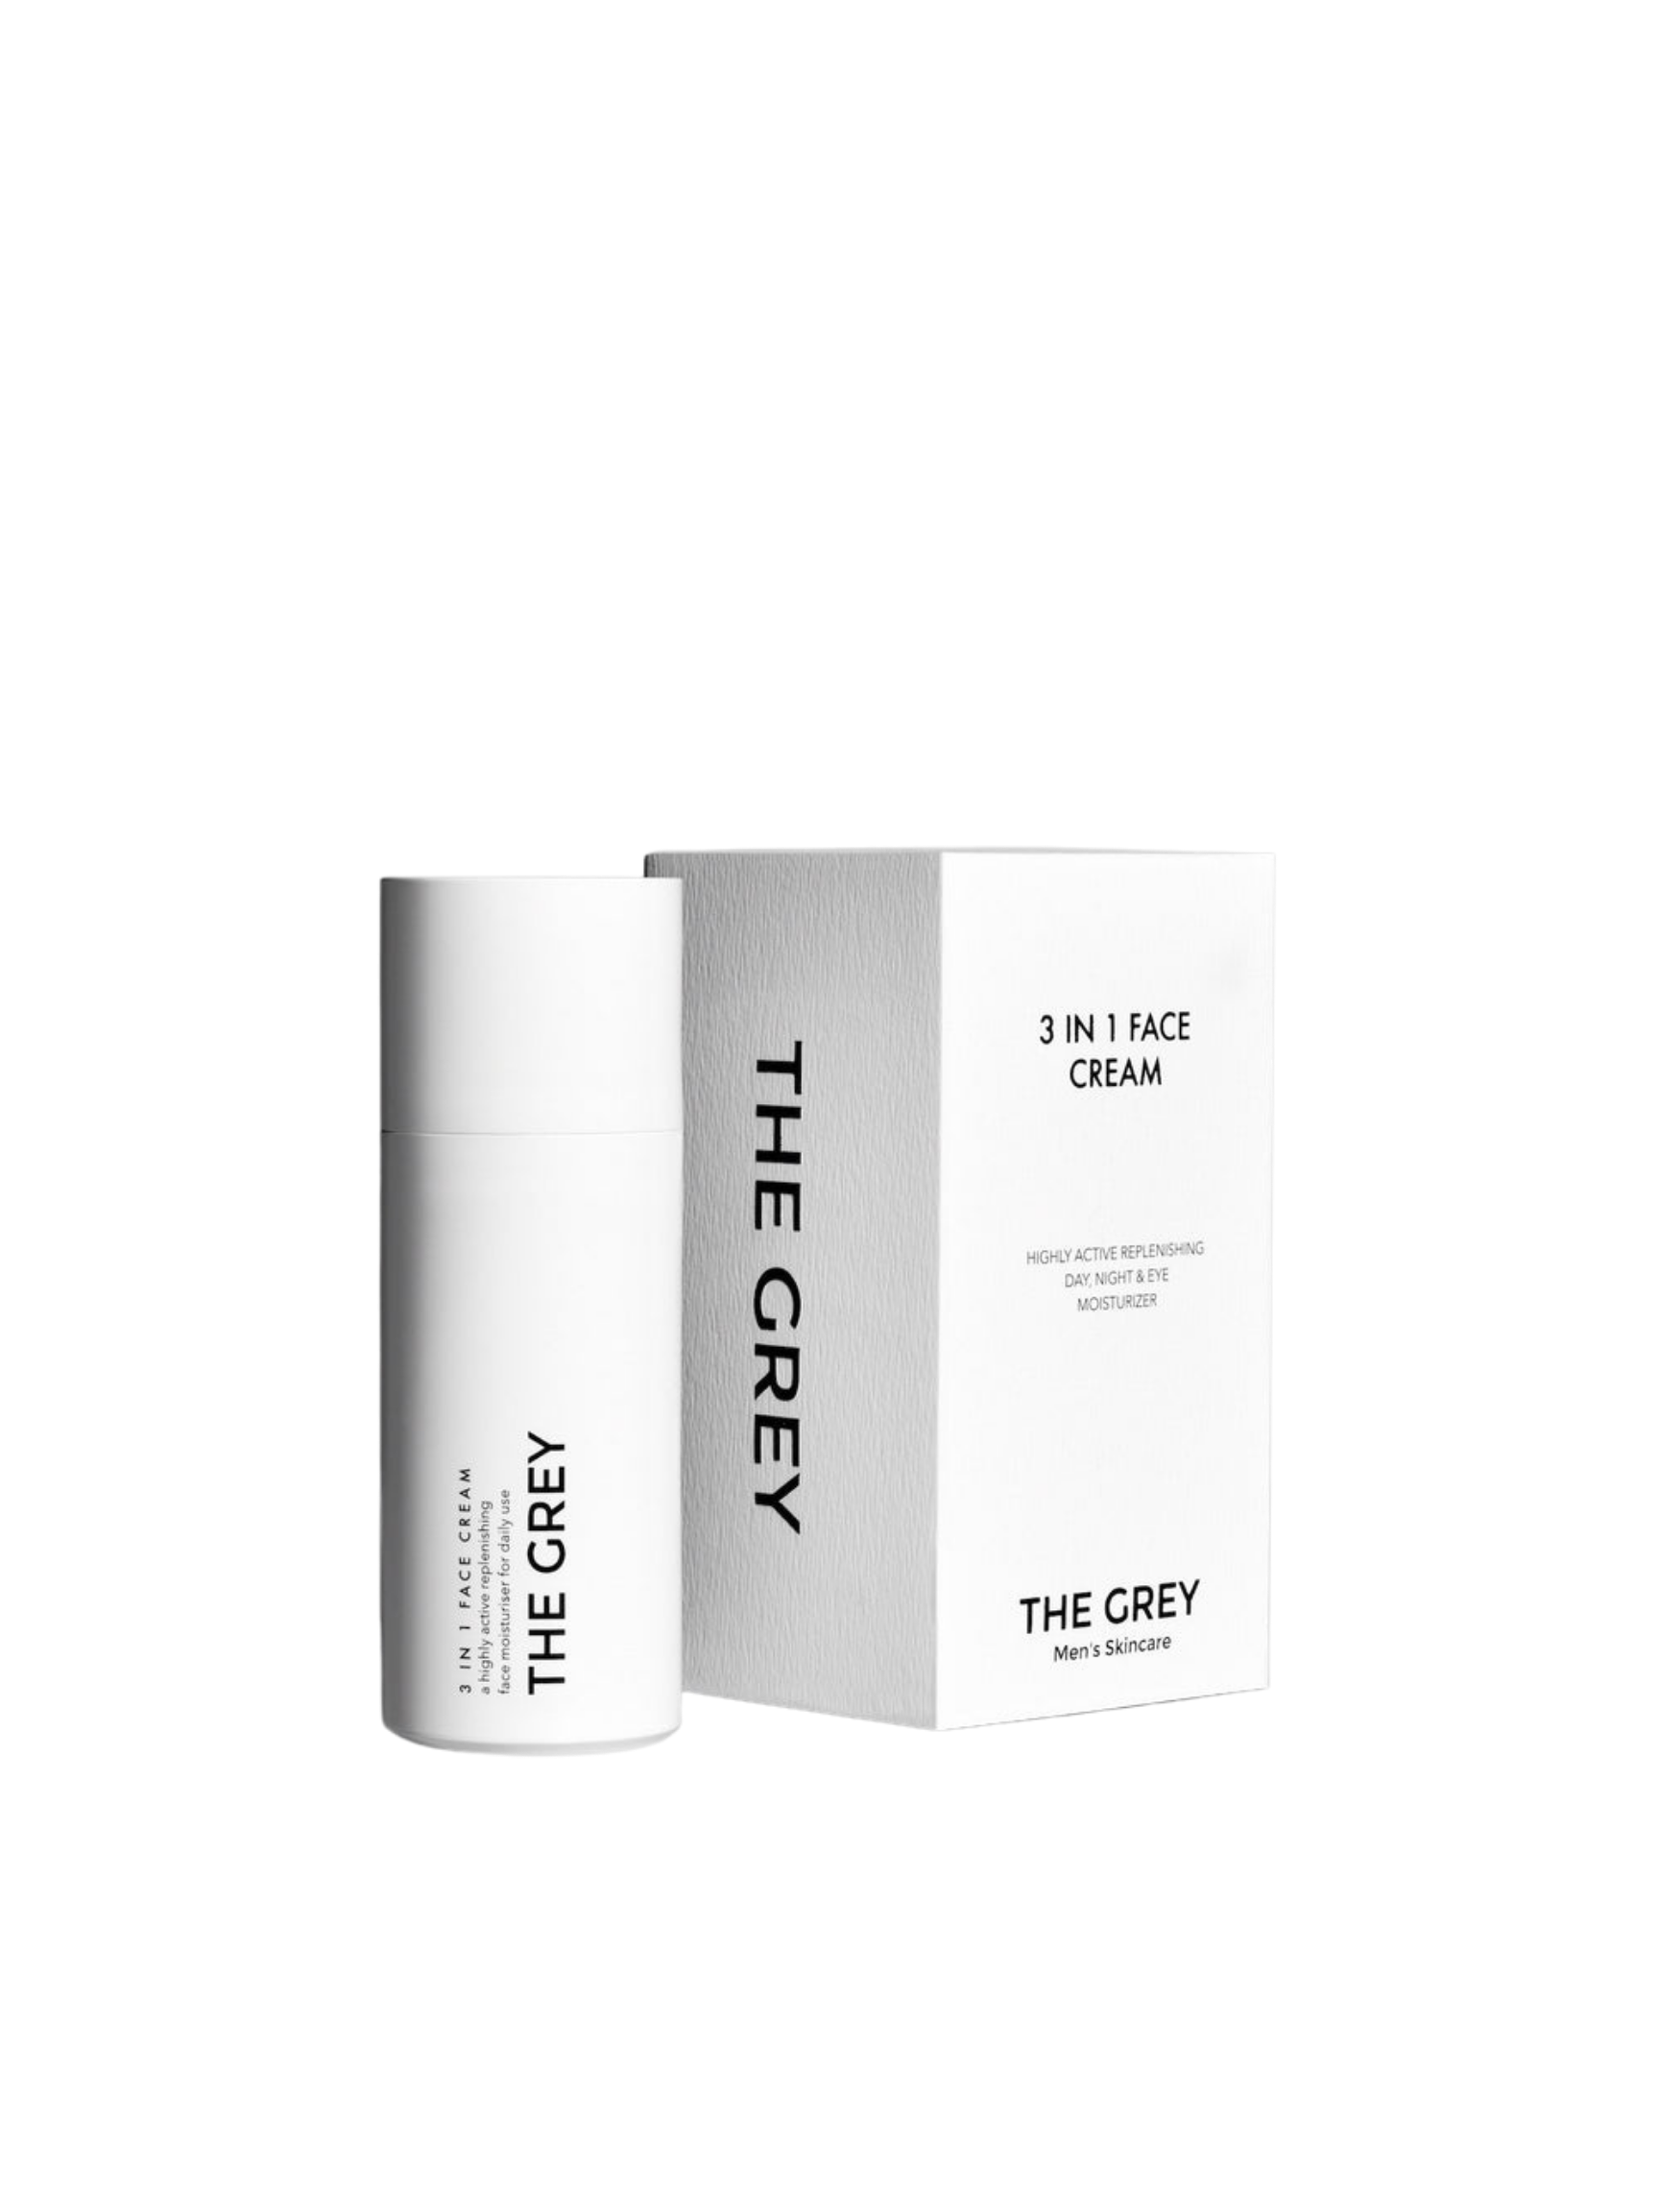 The Grey Skincare 3 in 1 Face Cream 50mL, 3 in 1 Face Cream, The Grey Skincare, PourHommies